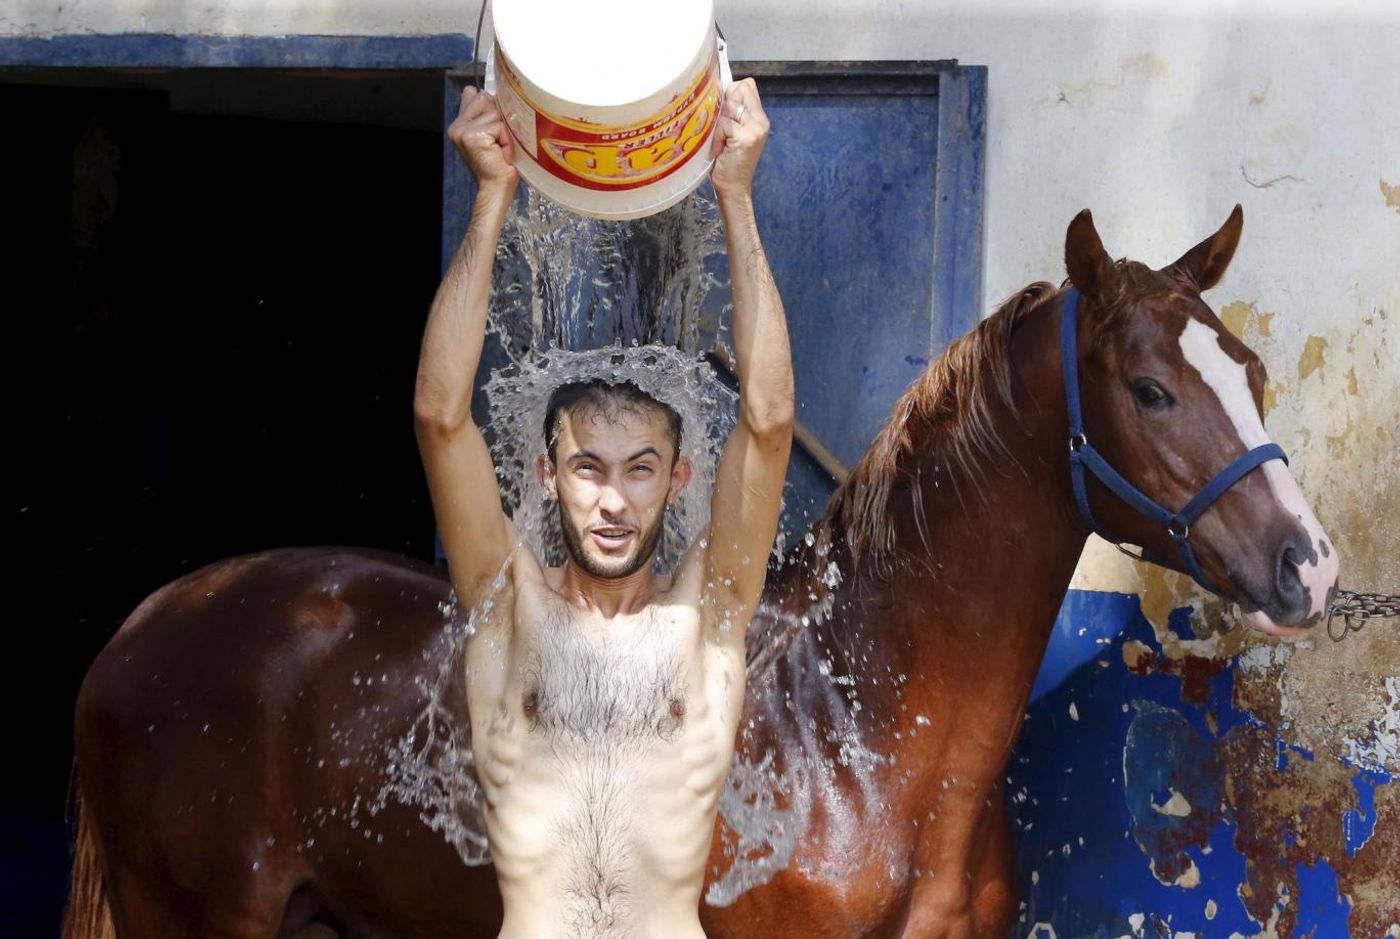 A man pours water over himself while washing a horse in order to cool it down as part of measures taken to ease the effect of a heatwave at the Beirut Hippodrome, Lebanon REUTERS/Mohamed Azakir